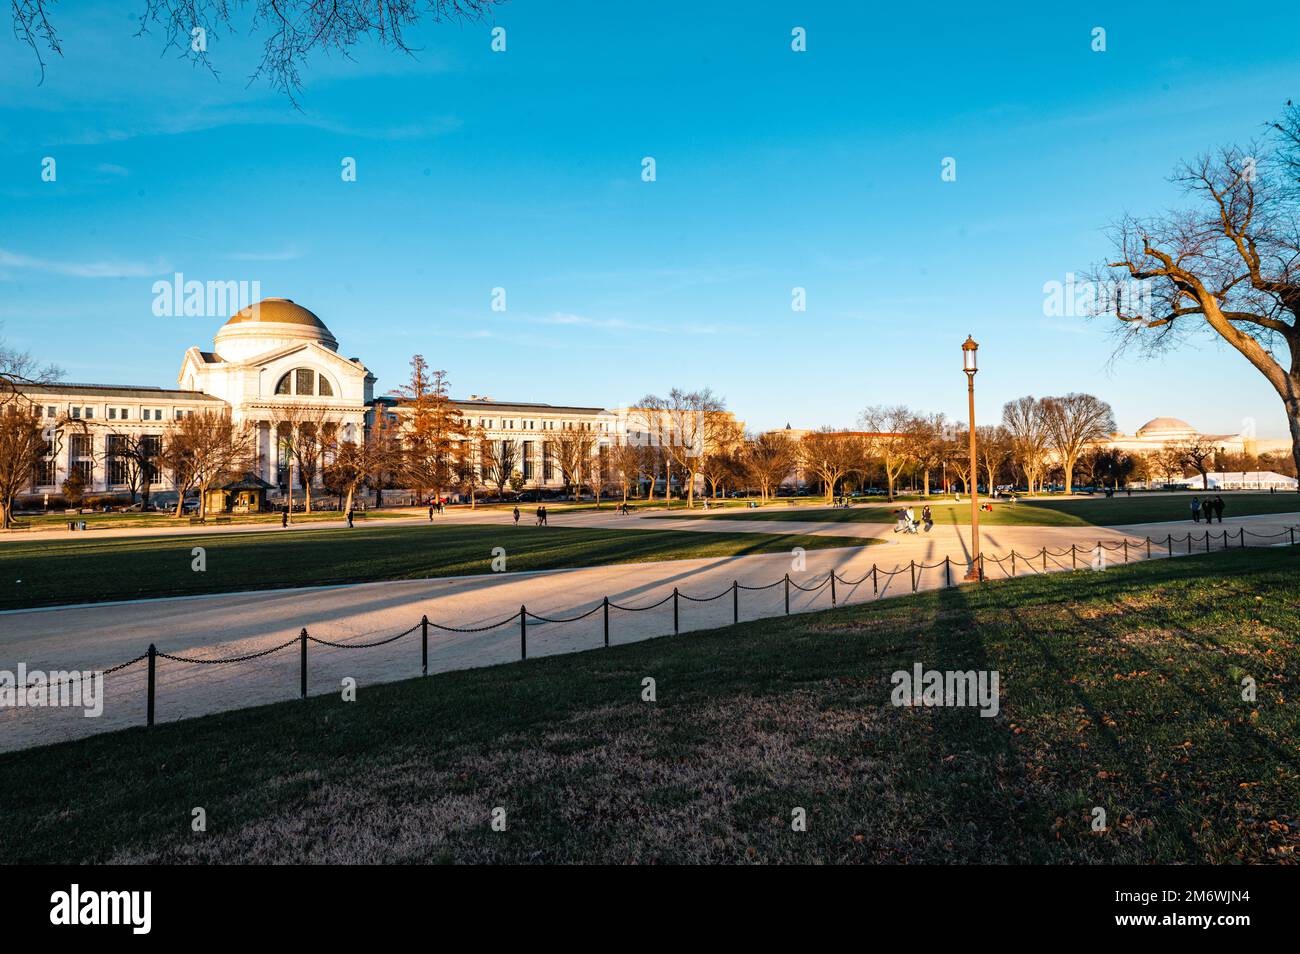 Evening picture, no clouds, blue sky. Panoramic view of The National Mall in Washington, D.C. A vast green space that stretches for over two miles. Stock Photo